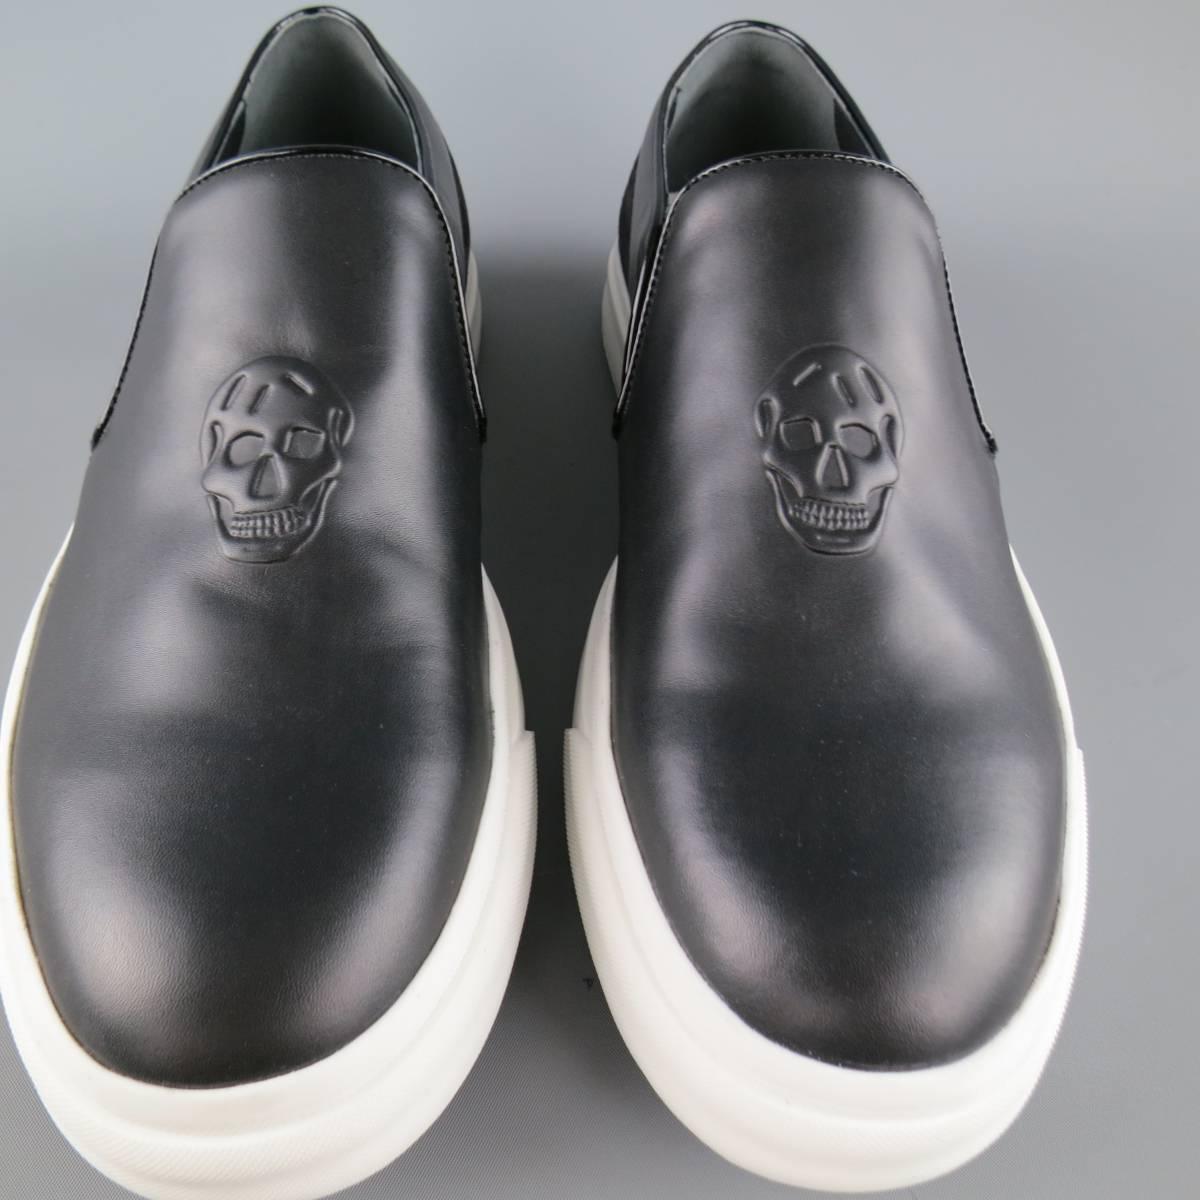 ALEXANDER MCQUEEN slip on sneakers come in smooth black leather and feature patent leather piping, embossed skull logo, embroidered suede back panel, and thick white rubber sole. With box. Made in Italy.
 
New in Box.
Marked: 42
 
Outsole: 11.75 x